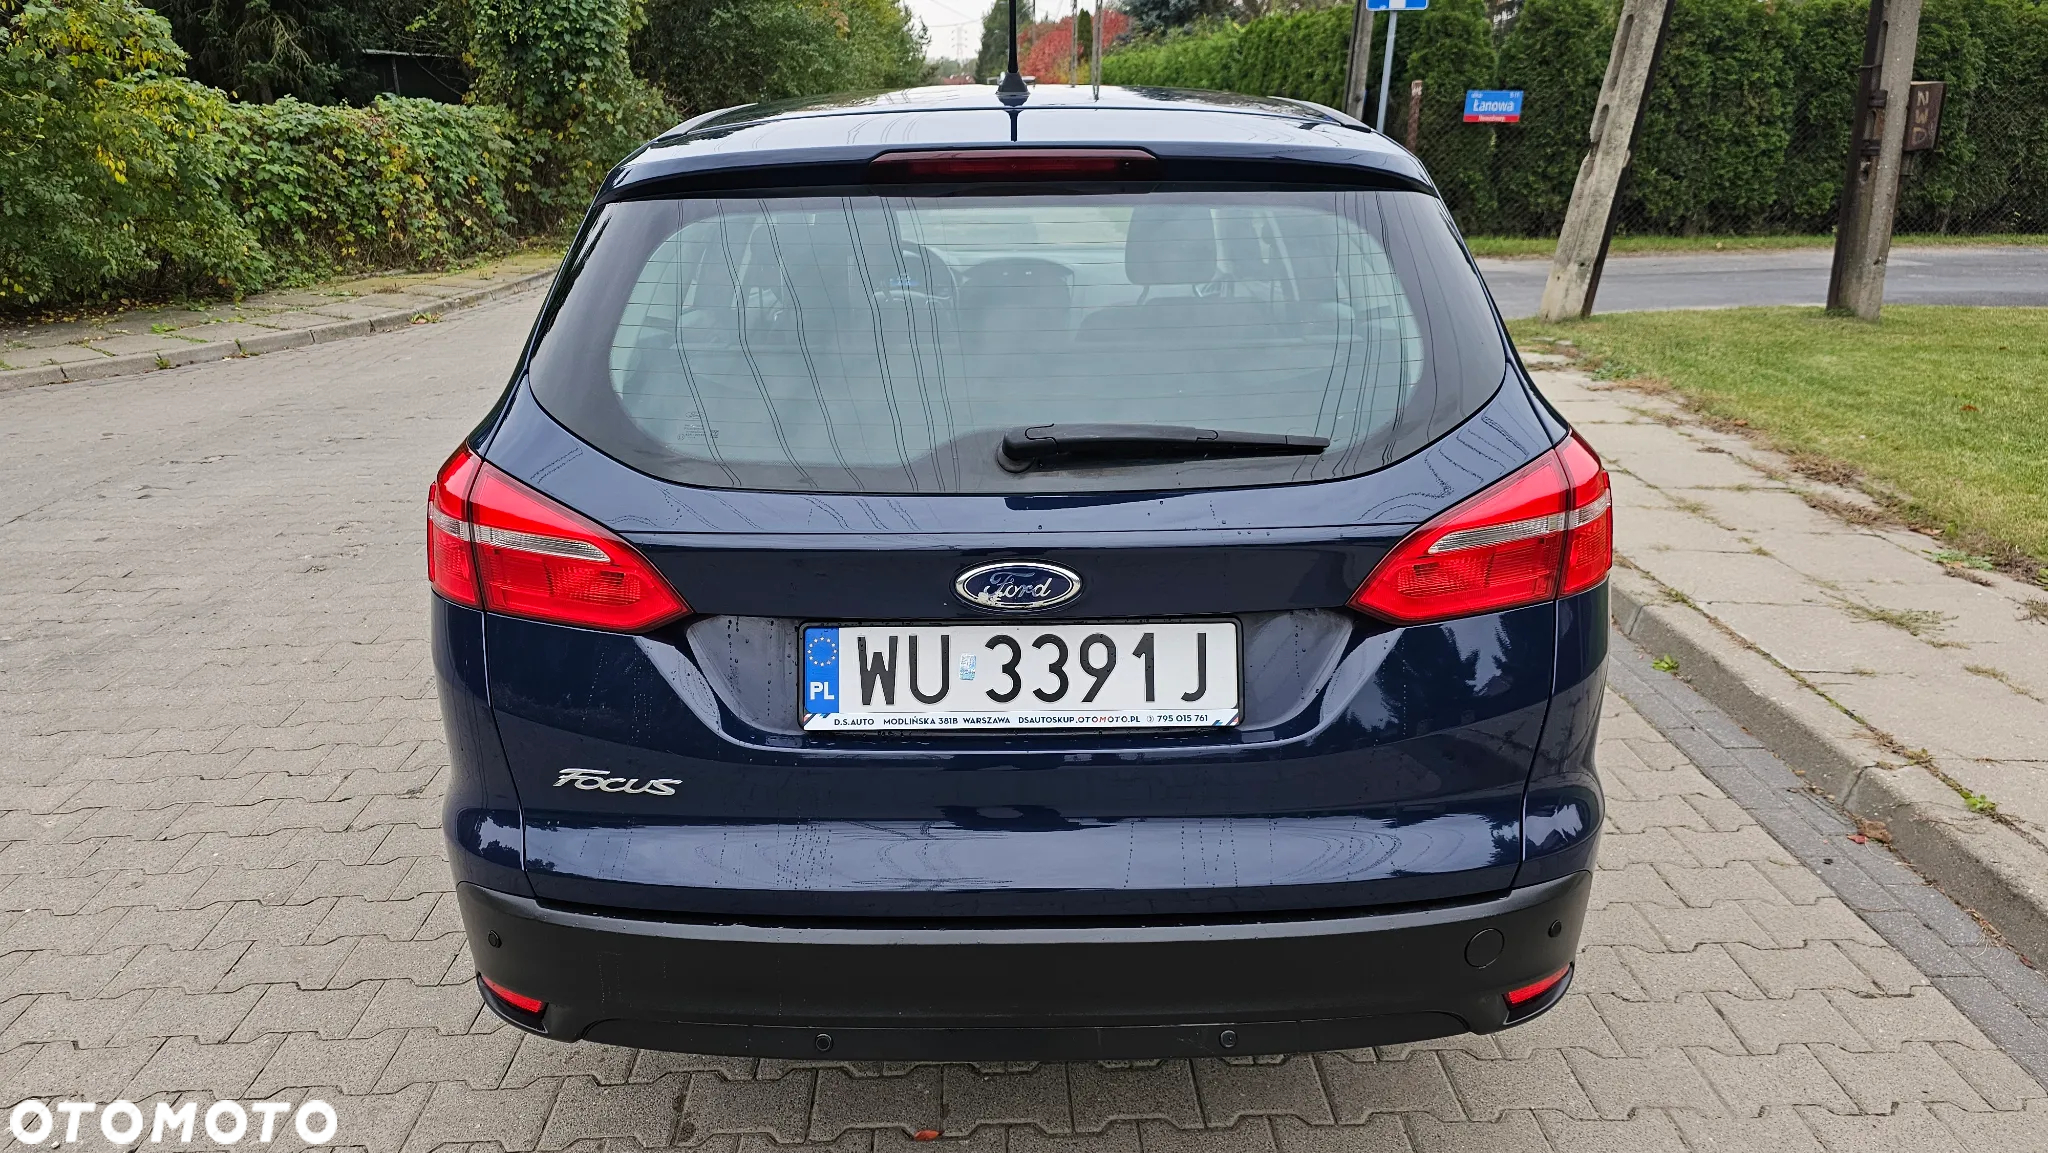 Ford Focus 1.6 TDCi Gold X (Trend) - 32